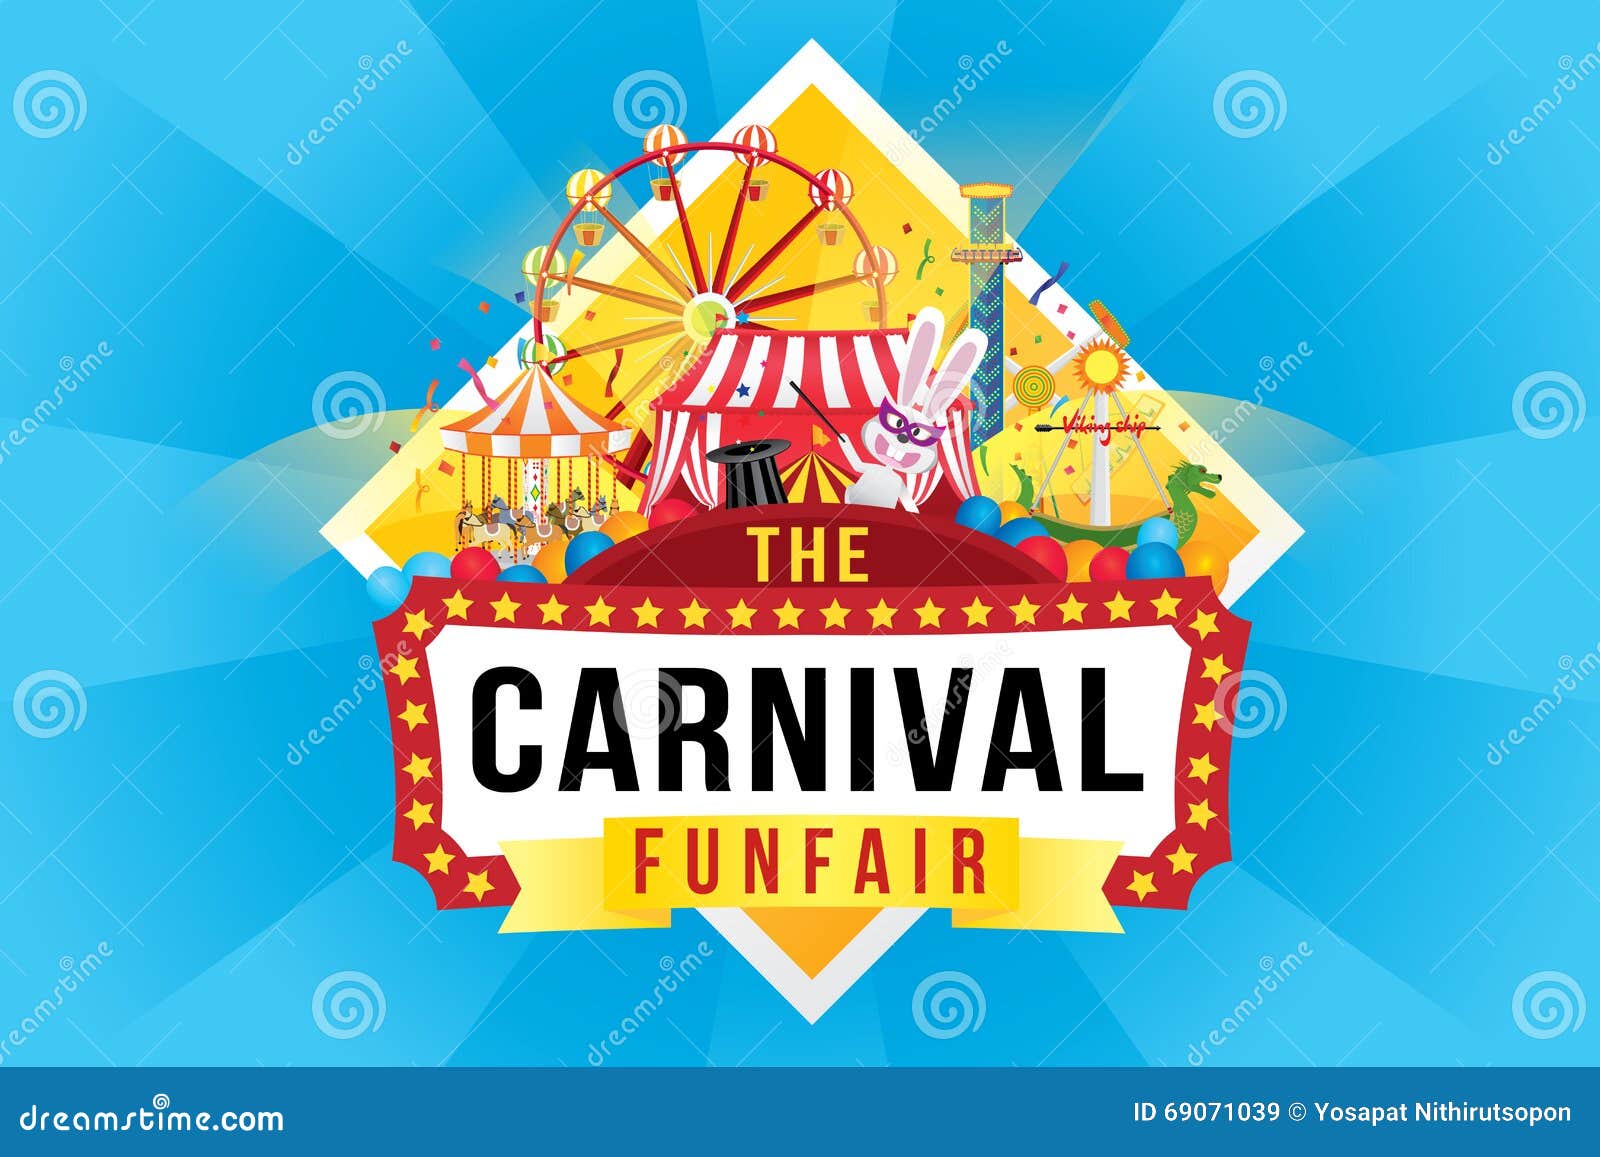 the carnival funfair and magic show